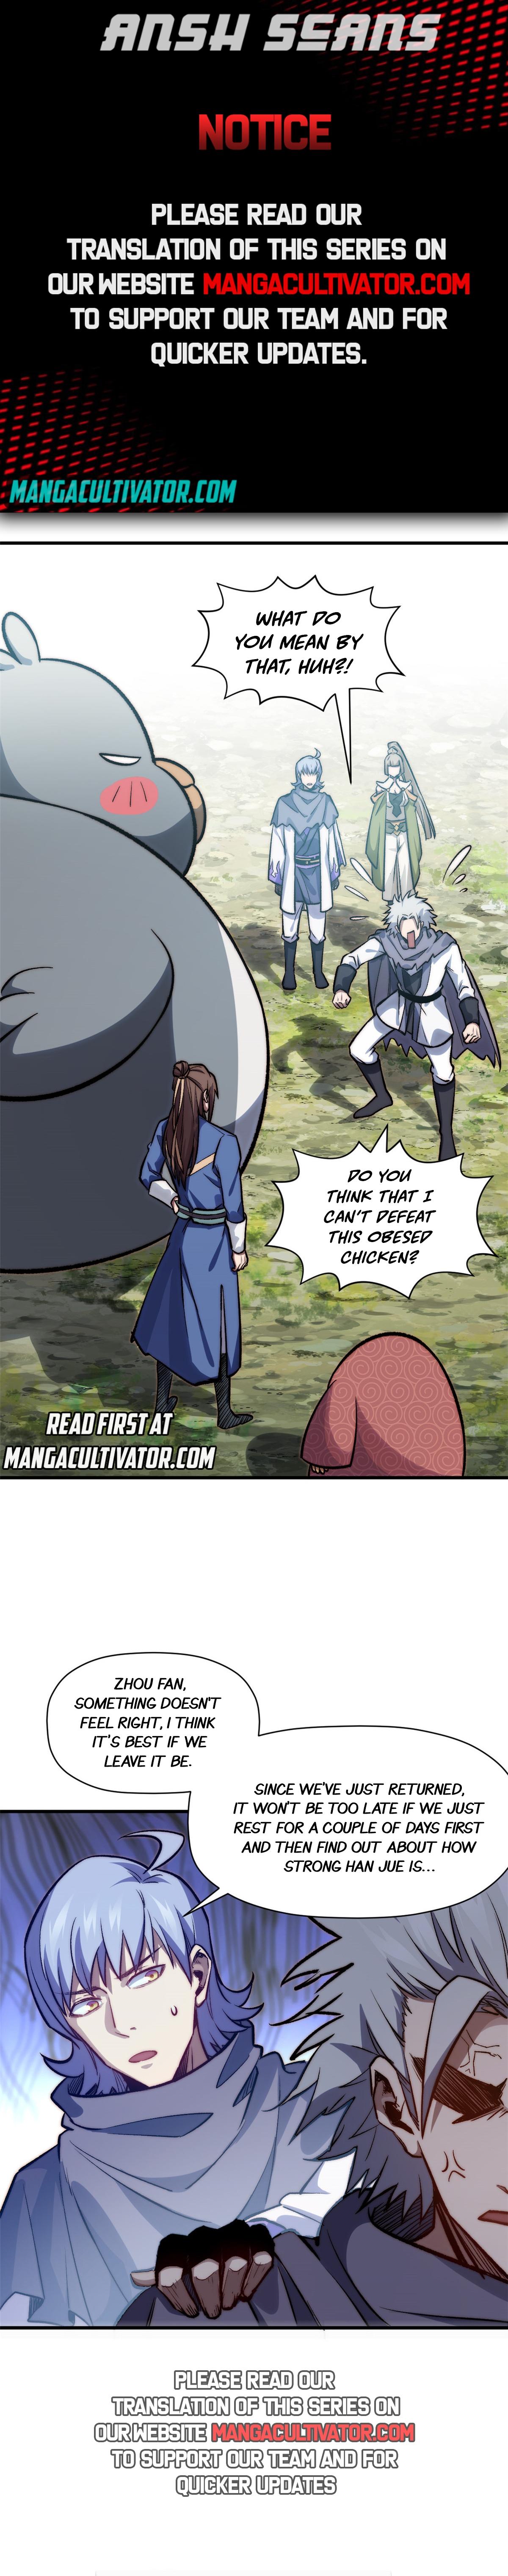 Top Tier Providence: Secretly Cultivate for a Thousand Years Ch.40 Page 5 -  Mangago